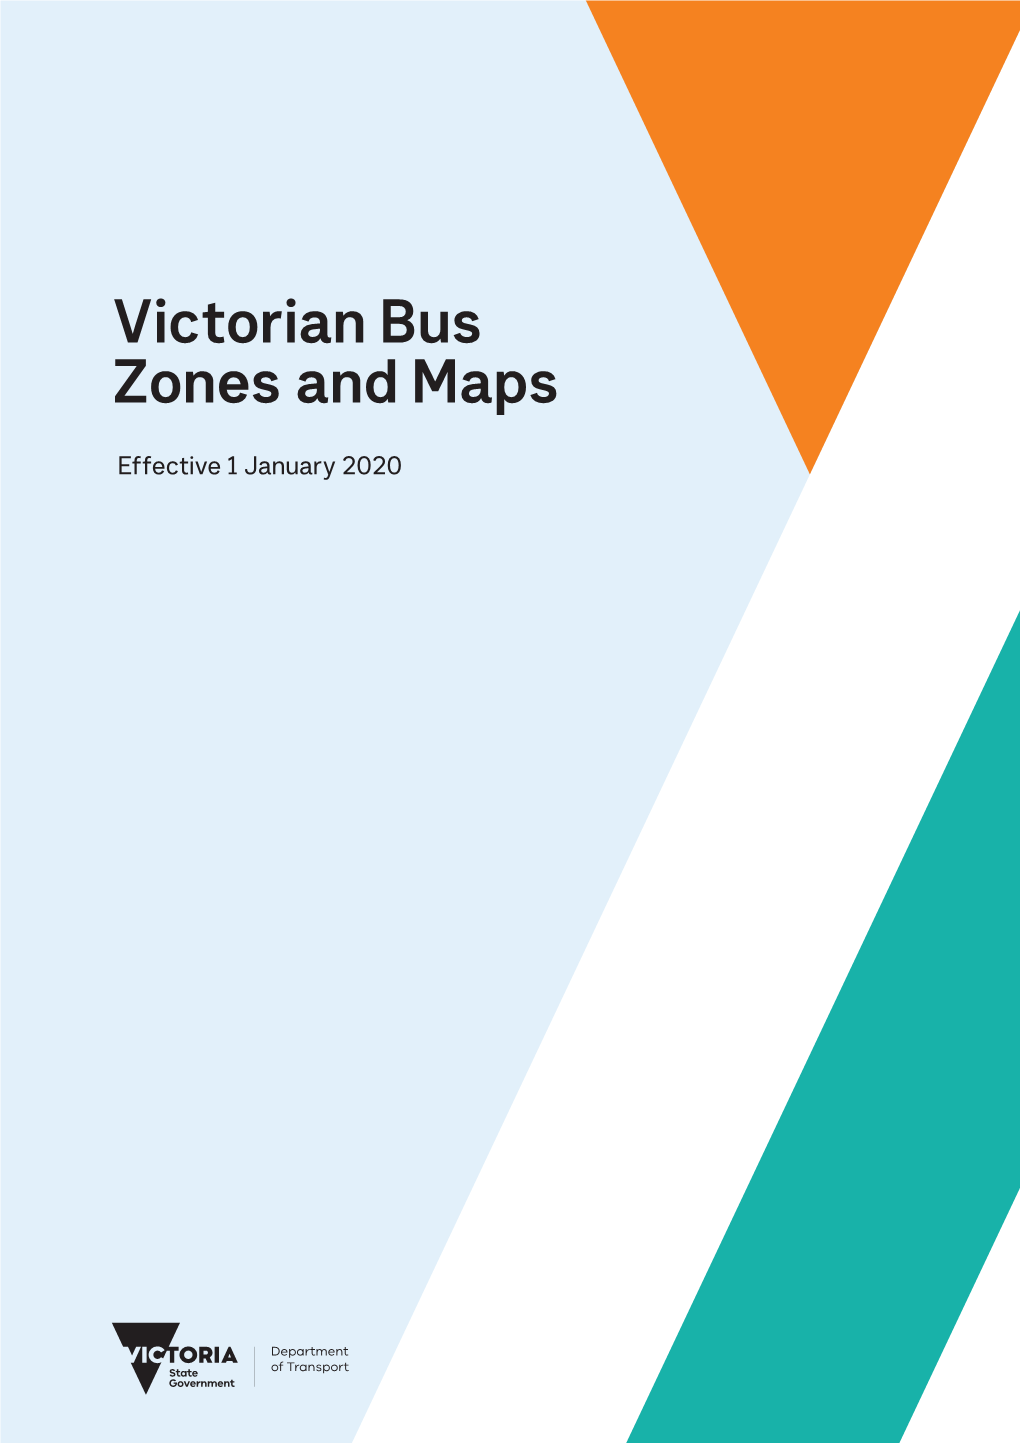 Victorian Bus Zones and Maps